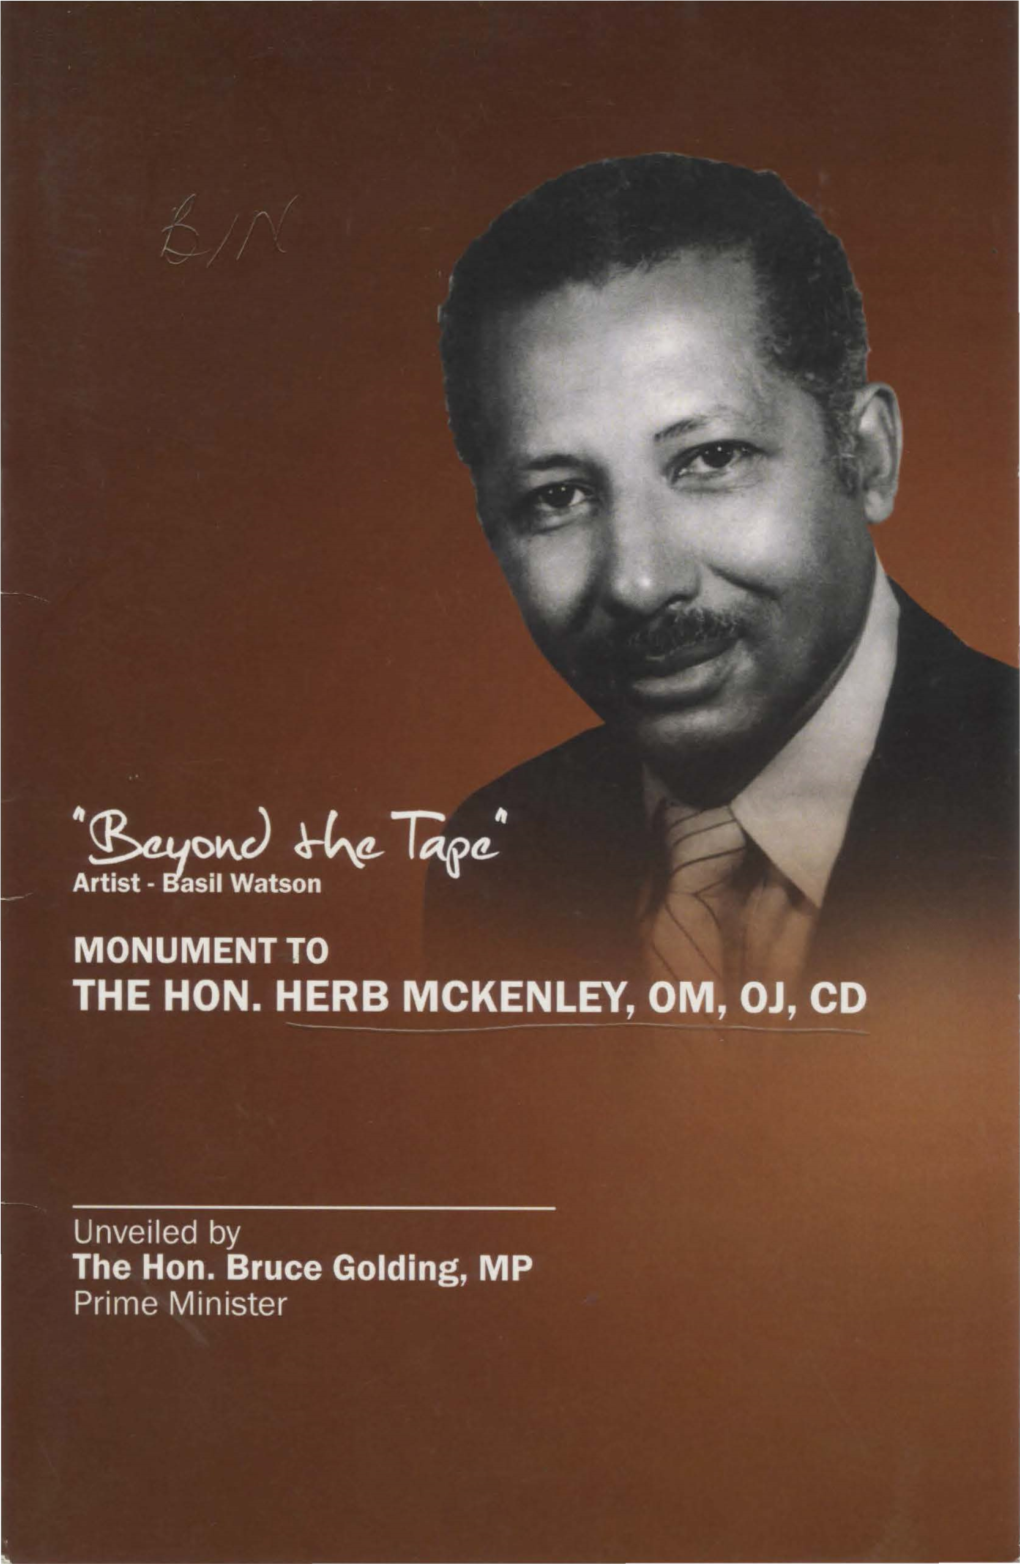 “Beyond the Tape”: Monument to the Hon. Her Mckenley, OM, OJ, CD. Artist